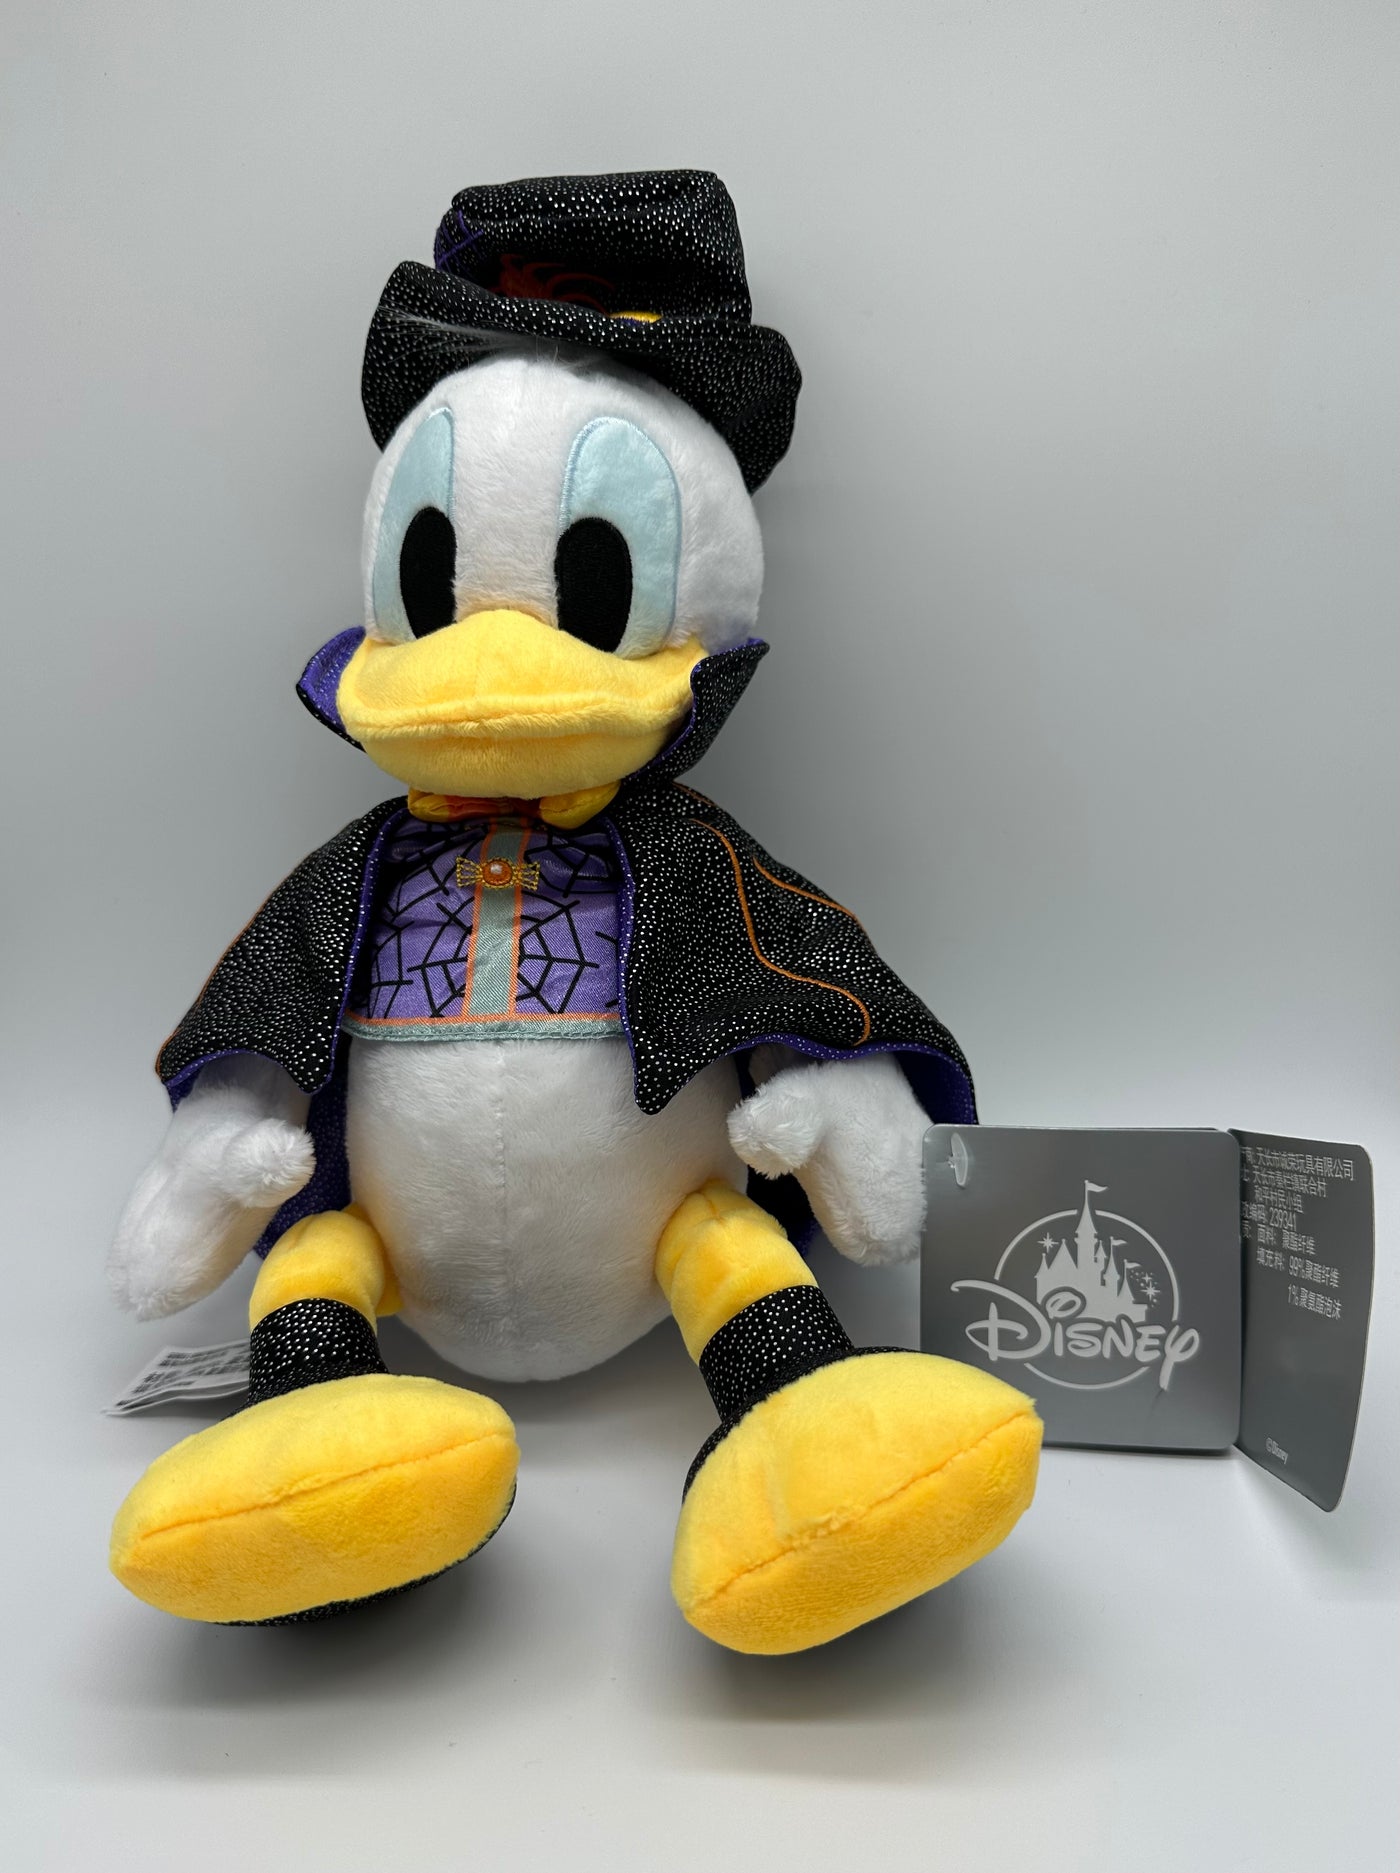 Disney Shanghai Resort Authentic Donald Duck Halloween Plush New with Tags